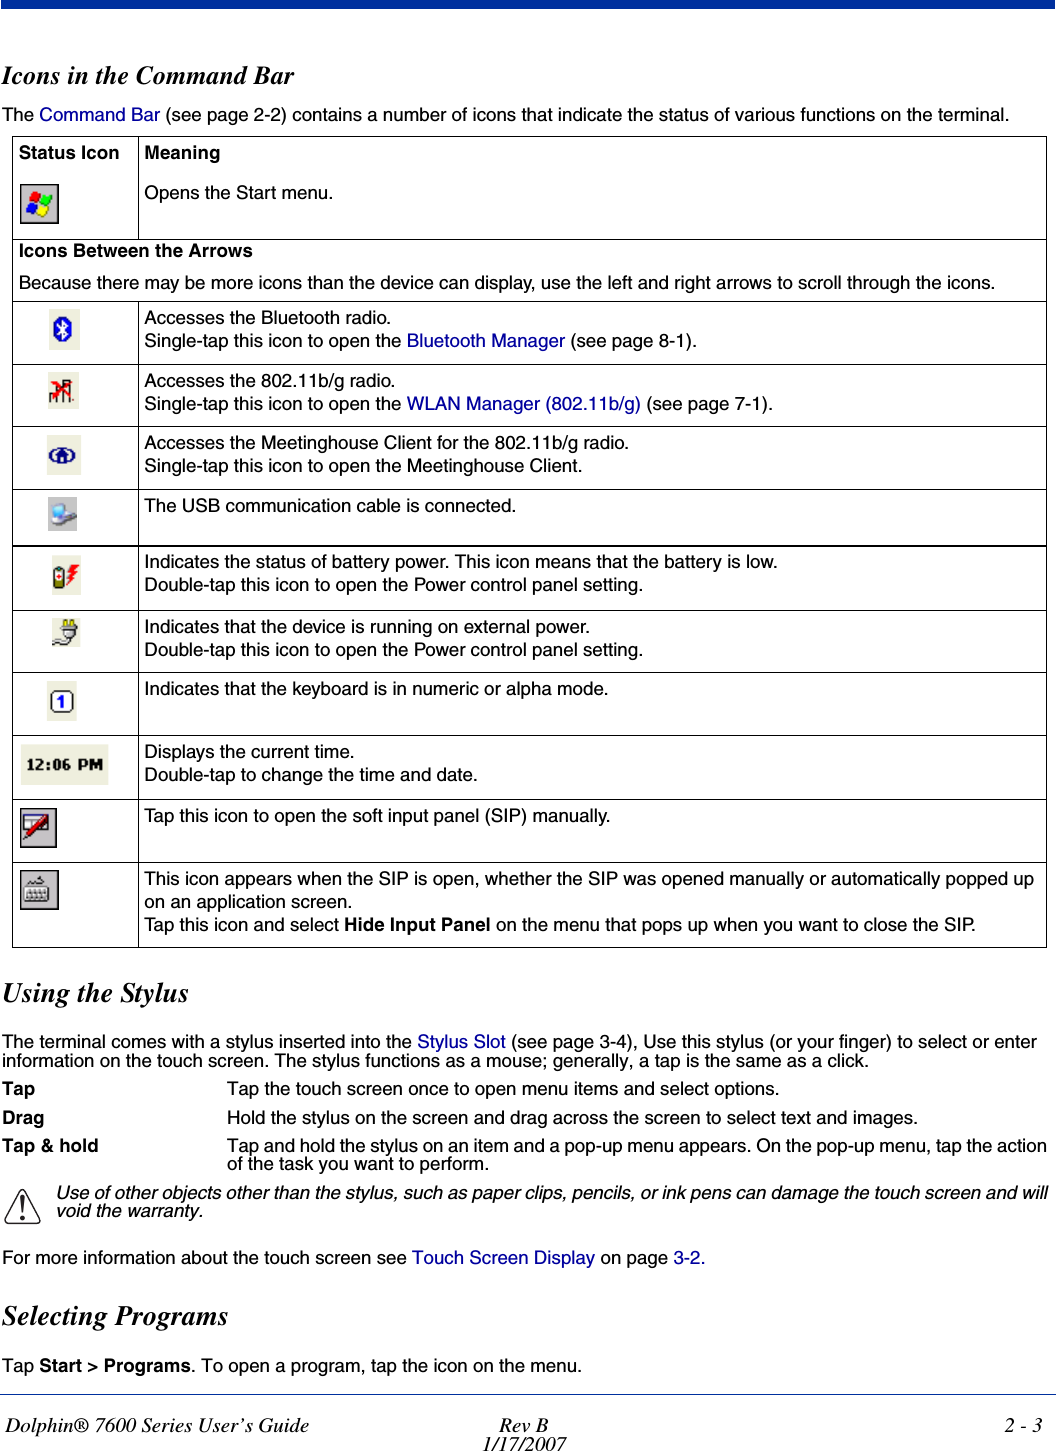 Dolphin® 7600 Series User’s Guide Rev B1/17/20072 - 3Icons in the Command BarThe Command Bar (see page 2-2) contains a number of icons that indicate the status of various functions on the terminal.Using the StylusThe terminal comes with a stylus inserted into the Stylus Slot (see page 3-4), Use this stylus (or your finger) to select or enter information on the touch screen. The stylus functions as a mouse; generally, a tap is the same as a click.Tap Tap the touch screen once to open menu items and select options.Drag Hold the stylus on the screen and drag across the screen to select text and images.Tap &amp; hold Tap and hold the stylus on an item and a pop-up menu appears. On the pop-up menu, tap the action of the task you want to perform.Use of other objects other than the stylus, such as paper clips, pencils, or ink pens can damage the touch screen and will void the warranty.For more information about the touch screen see Touch Screen Display on page 3-2.Selecting ProgramsTap Start &gt; Programs. To open a program, tap the icon on the menu.Status Icon MeaningOpens the Start menu.Icons Between the ArrowsBecause there may be more icons than the device can display, use the left and right arrows to scroll through the icons. Accesses the Bluetooth radio. Single-tap this icon to open the Bluetooth Manager (see page 8-1).Accesses the 802.11b/g radio.Single-tap this icon to open the WLAN Manager (802.11b/g) (see page 7-1).Accesses the Meetinghouse Client for the 802.11b/g radio.Single-tap this icon to open the Meetinghouse Client.The USB communication cable is connected.Indicates the status of battery power. This icon means that the battery is low. Double-tap this icon to open the Power control panel setting. Indicates that the device is running on external power. Double-tap this icon to open the Power control panel setting. Indicates that the keyboard is in numeric or alpha mode.Displays the current time.Double-tap to change the time and date.Tap this icon to open the soft input panel (SIP) manually.This icon appears when the SIP is open, whether the SIP was opened manually or automatically popped up on an application screen. Tap this icon and select Hide Input Panel on the menu that pops up when you want to close the SIP.!